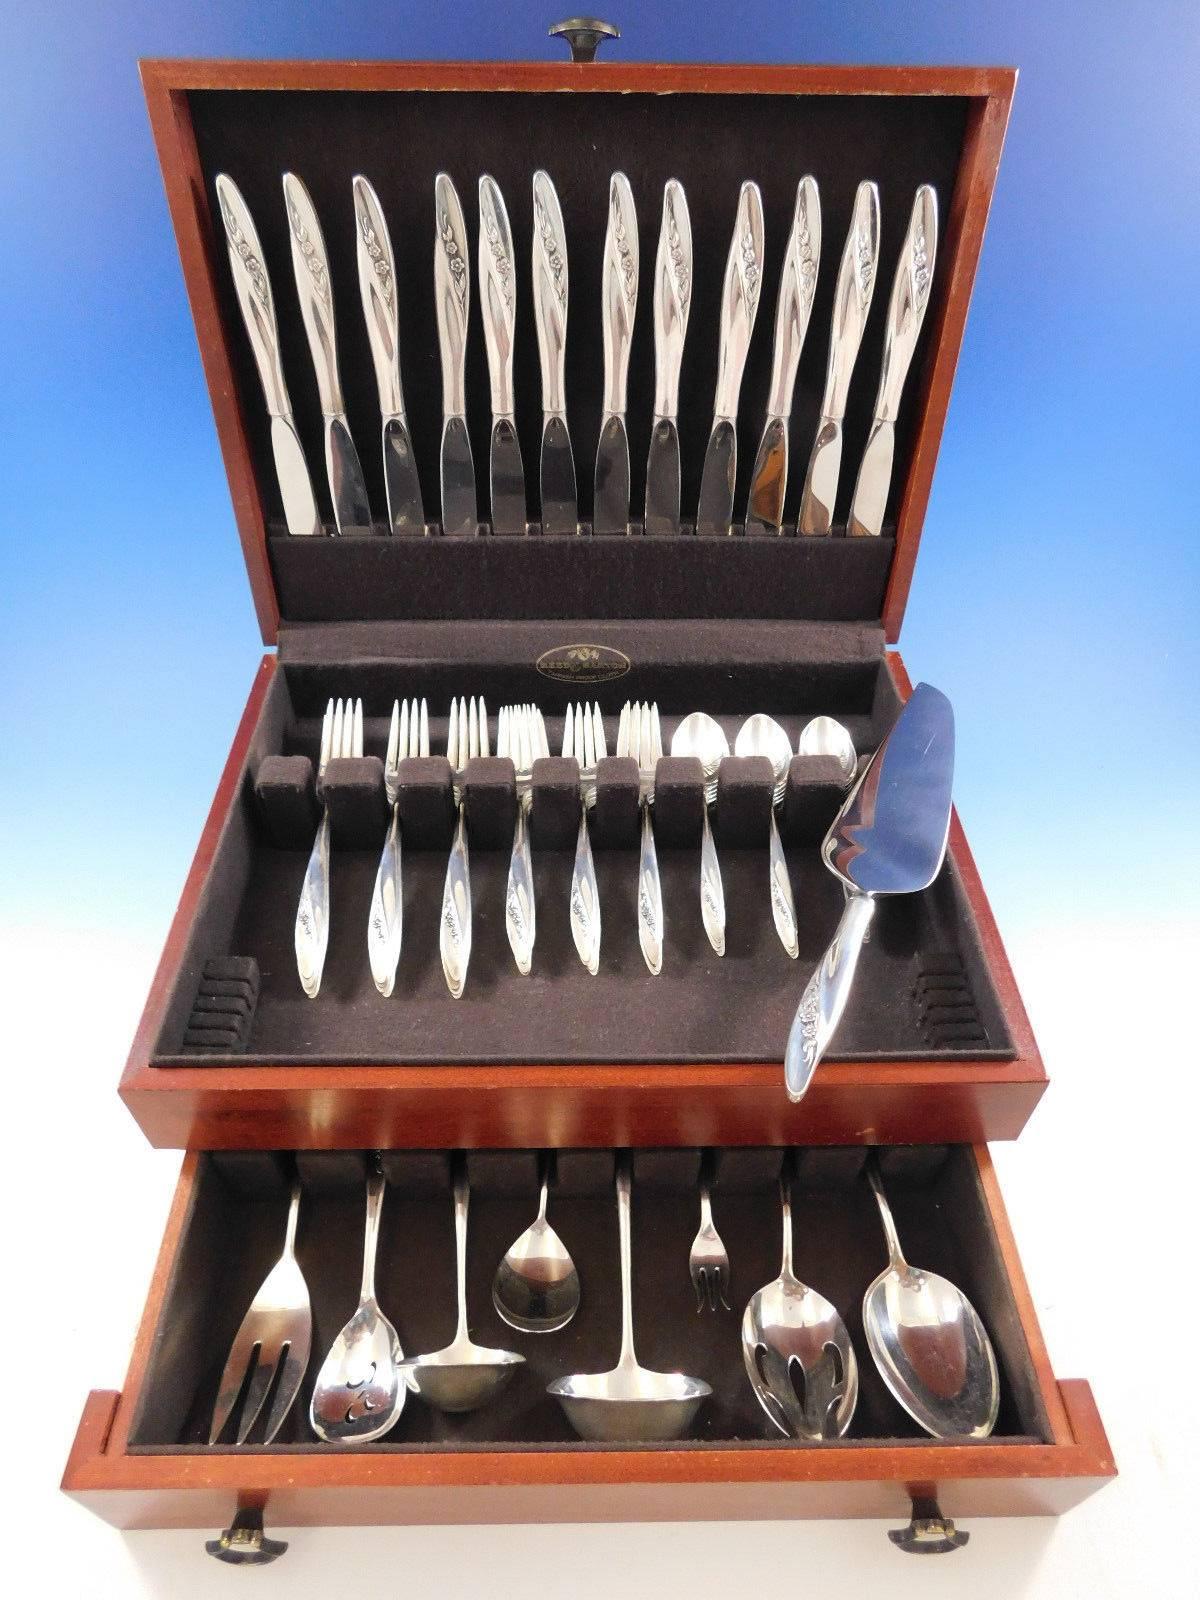 Blithe spirit by Gorham sterling silver flatware set, 58 pieces. This set includes: 

12 knives, 9 1/4